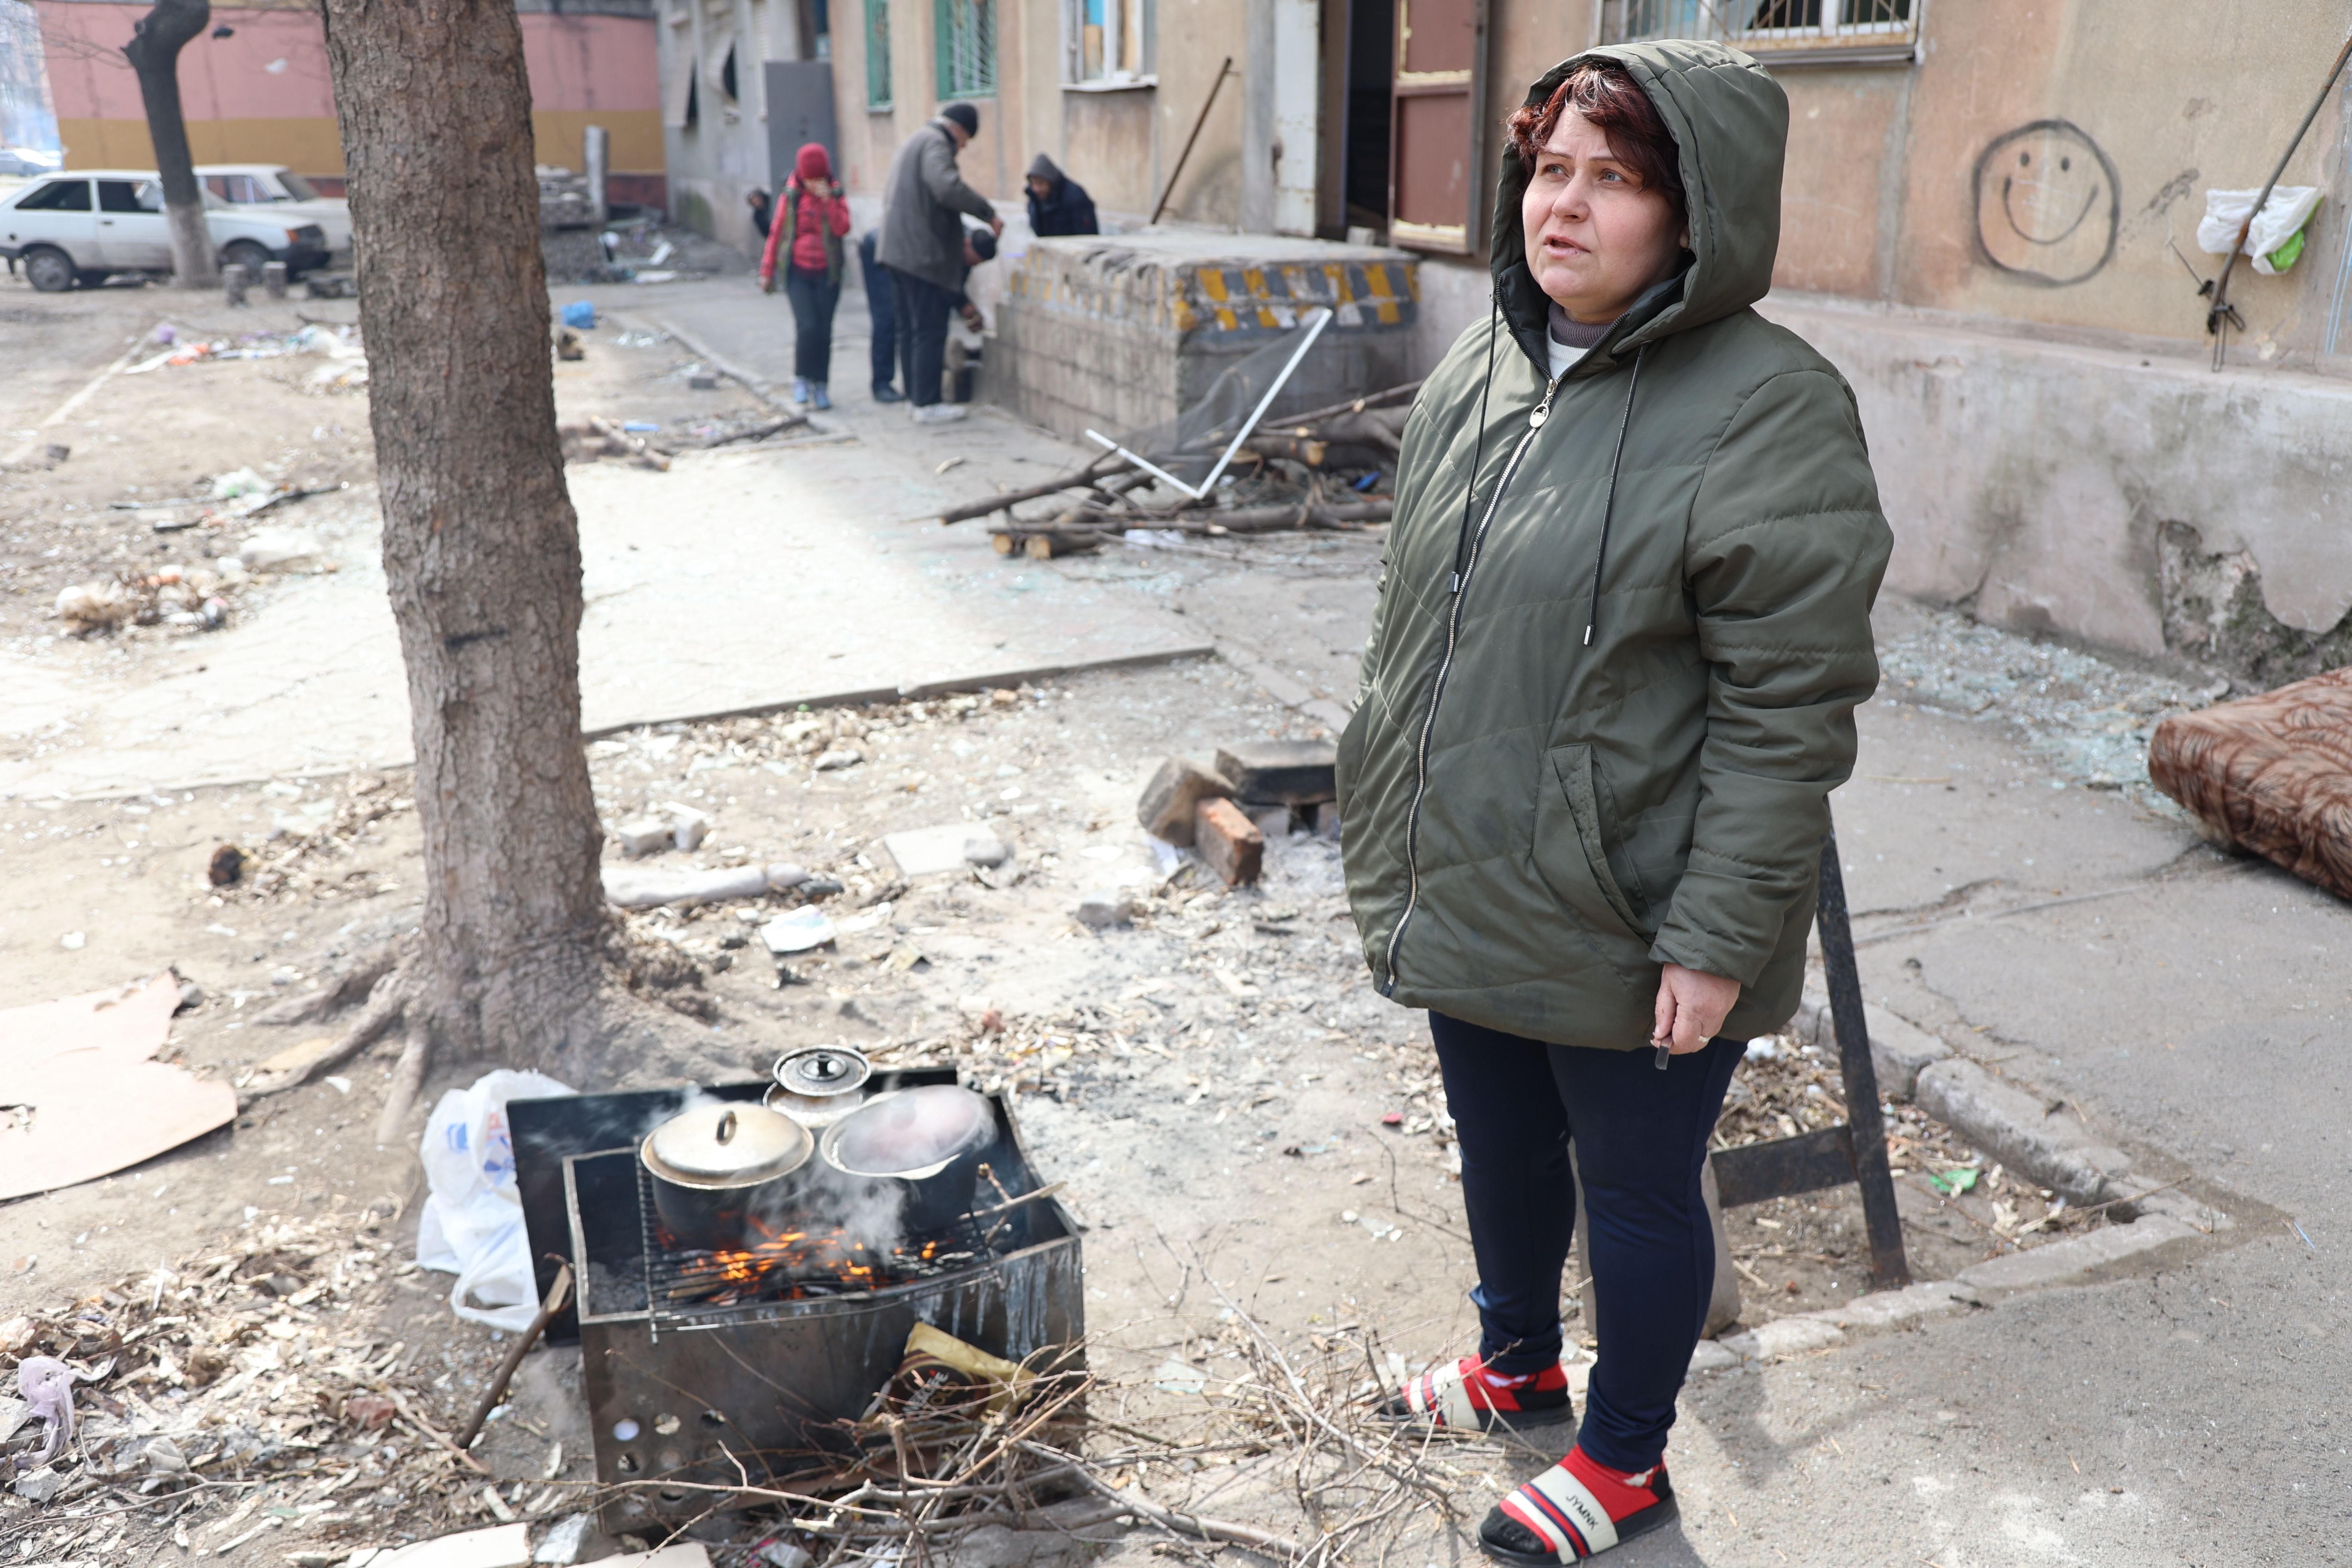 Civilians cook meal amid rubble of apartment damaged by shelling in the Ukrainian city of Mariupol under the control of Russian military and pro-Russian separatists, on March 29.